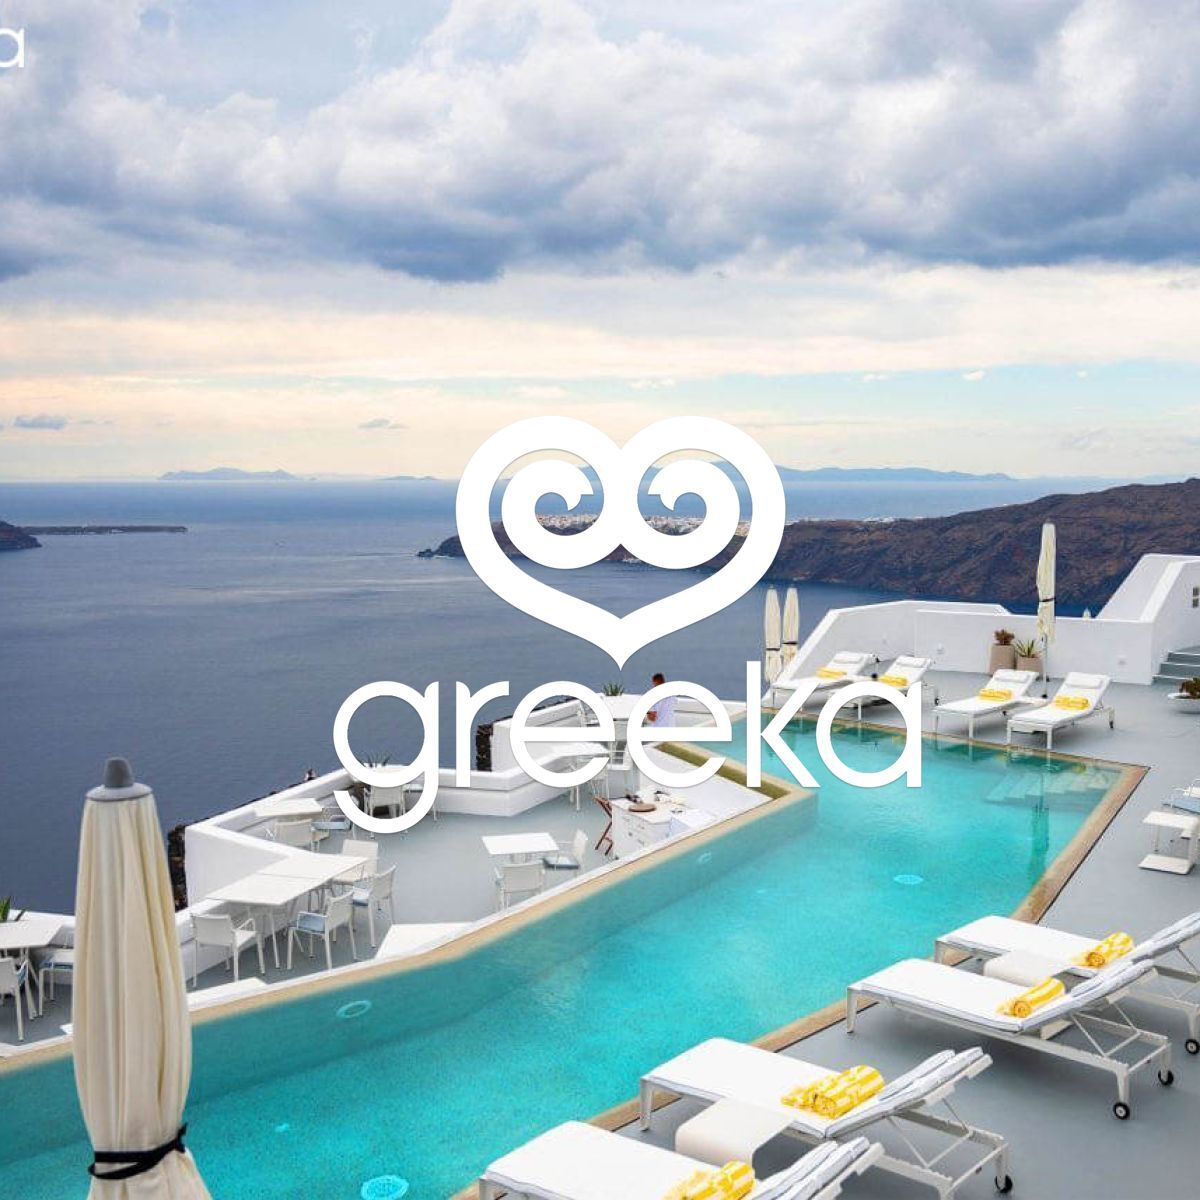 Weather in Greece & Best Time to Visit Greeka